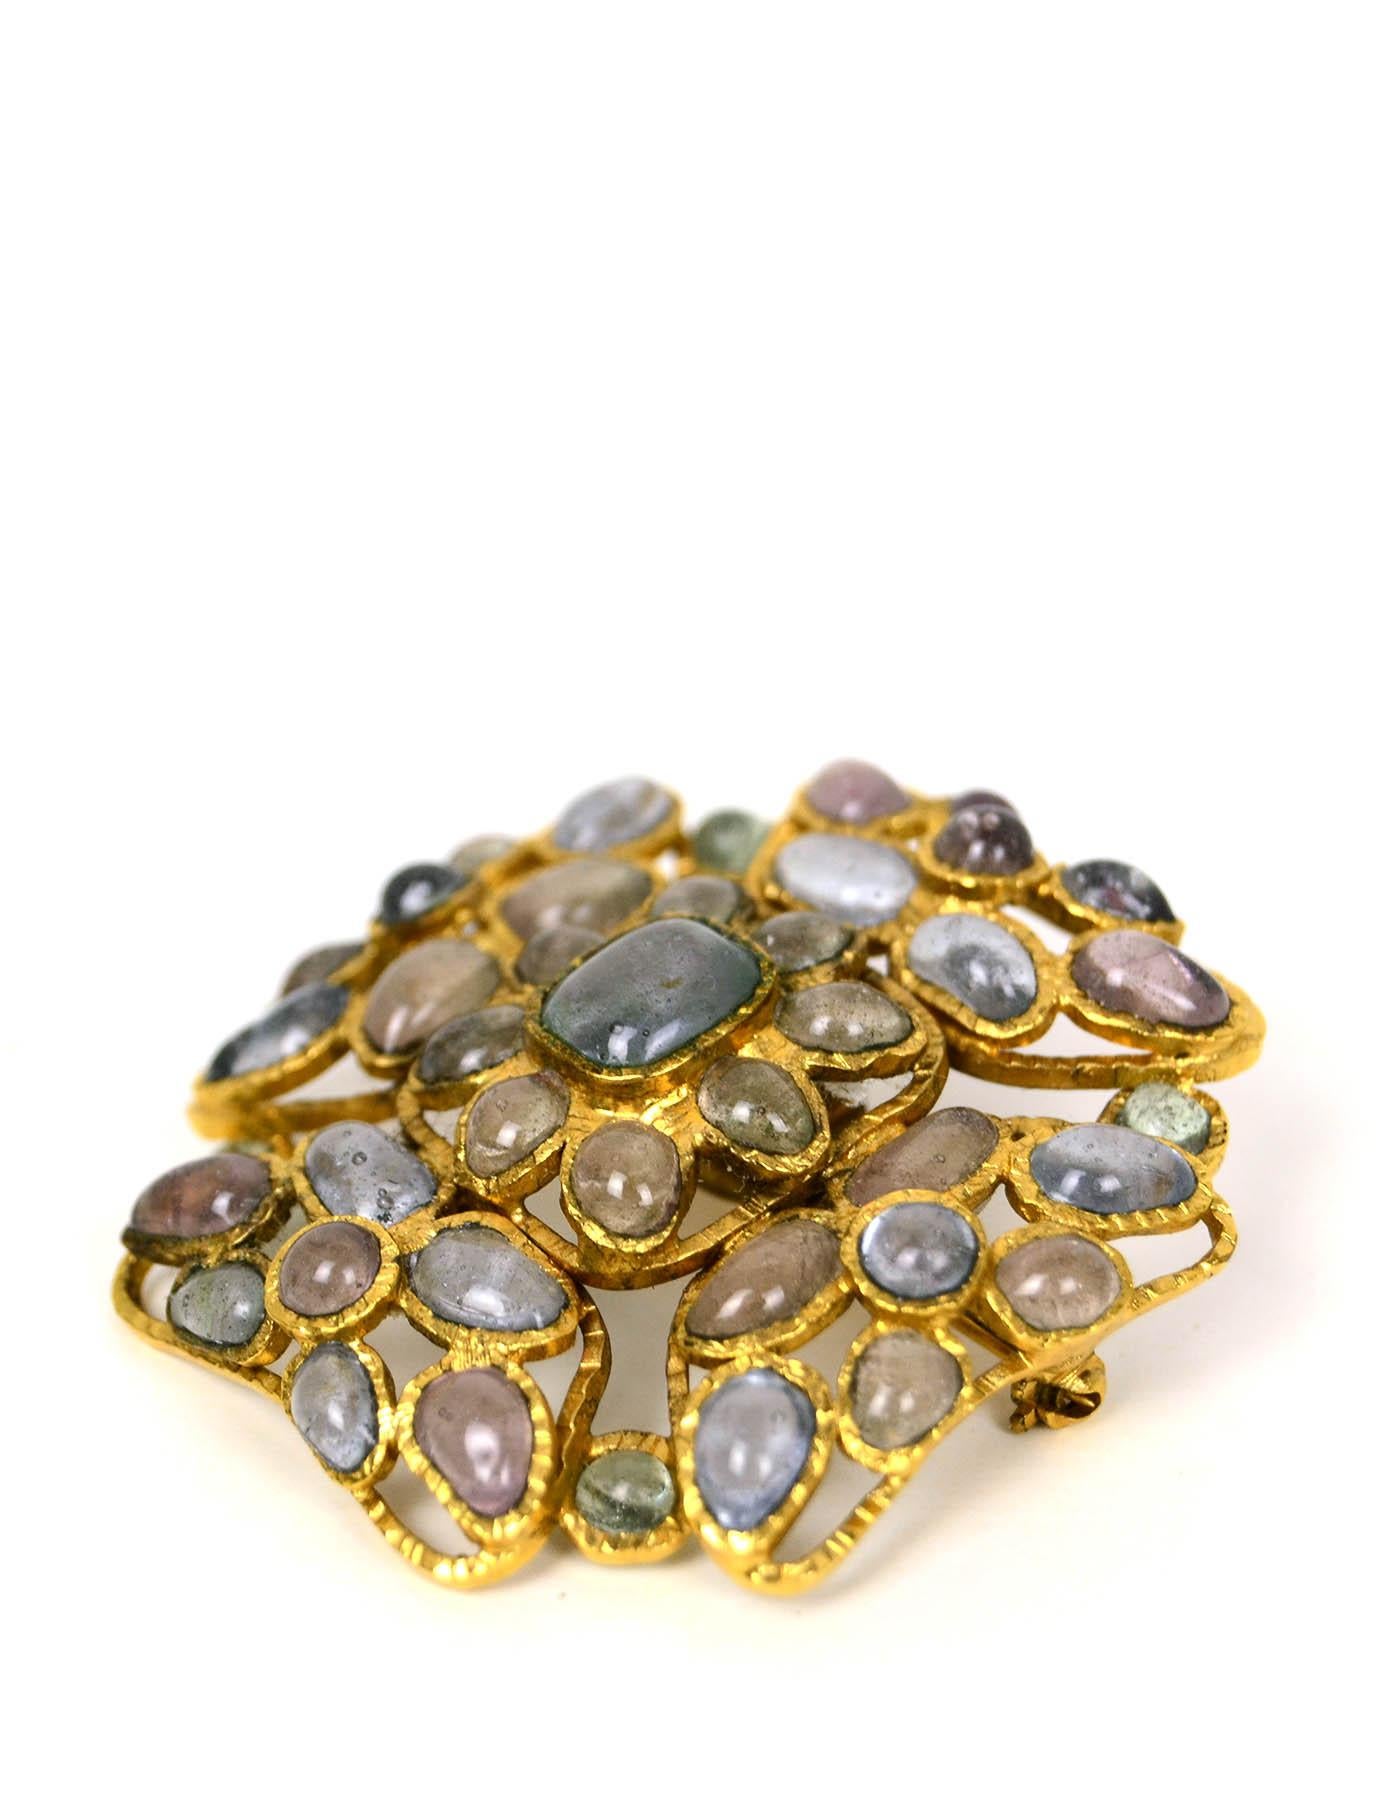 Chanel Vintage 1990s Light Blue Gripoix Class Brooch Pin In Excellent Condition For Sale In New York, NY